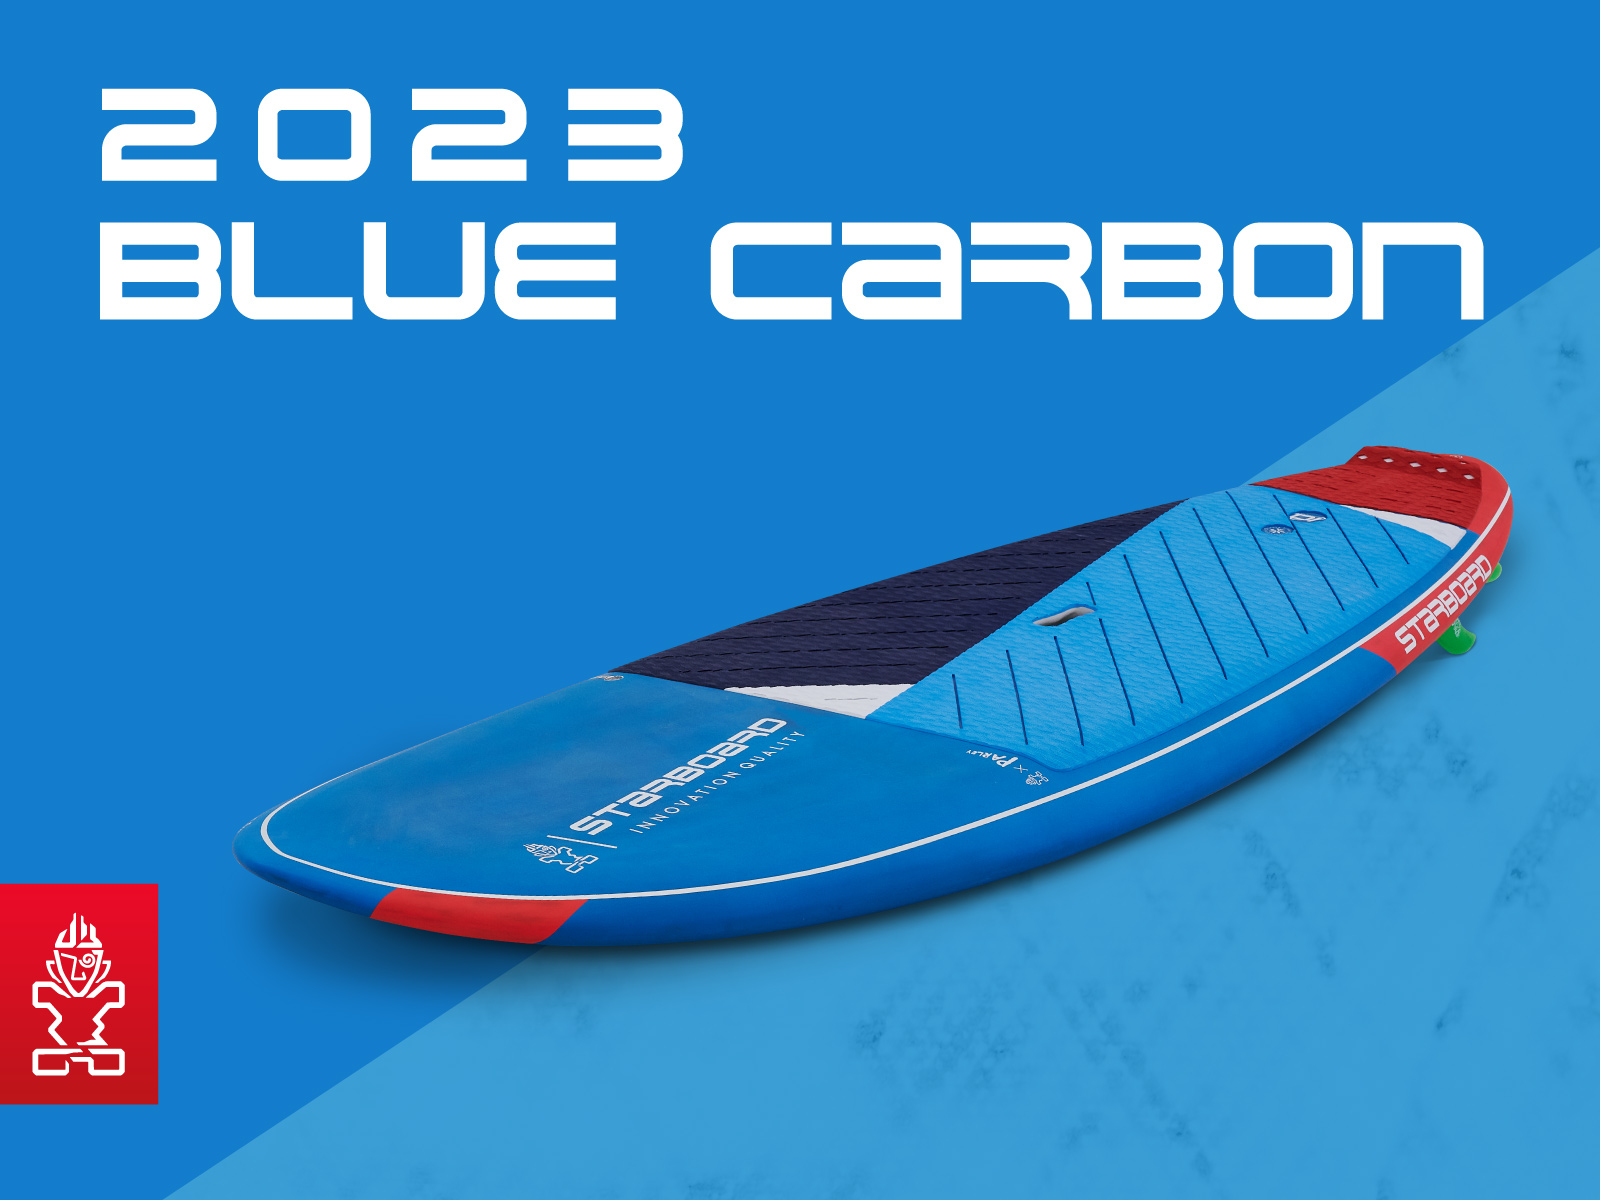 2023 Blue Carbon Construction » Starboard SUP